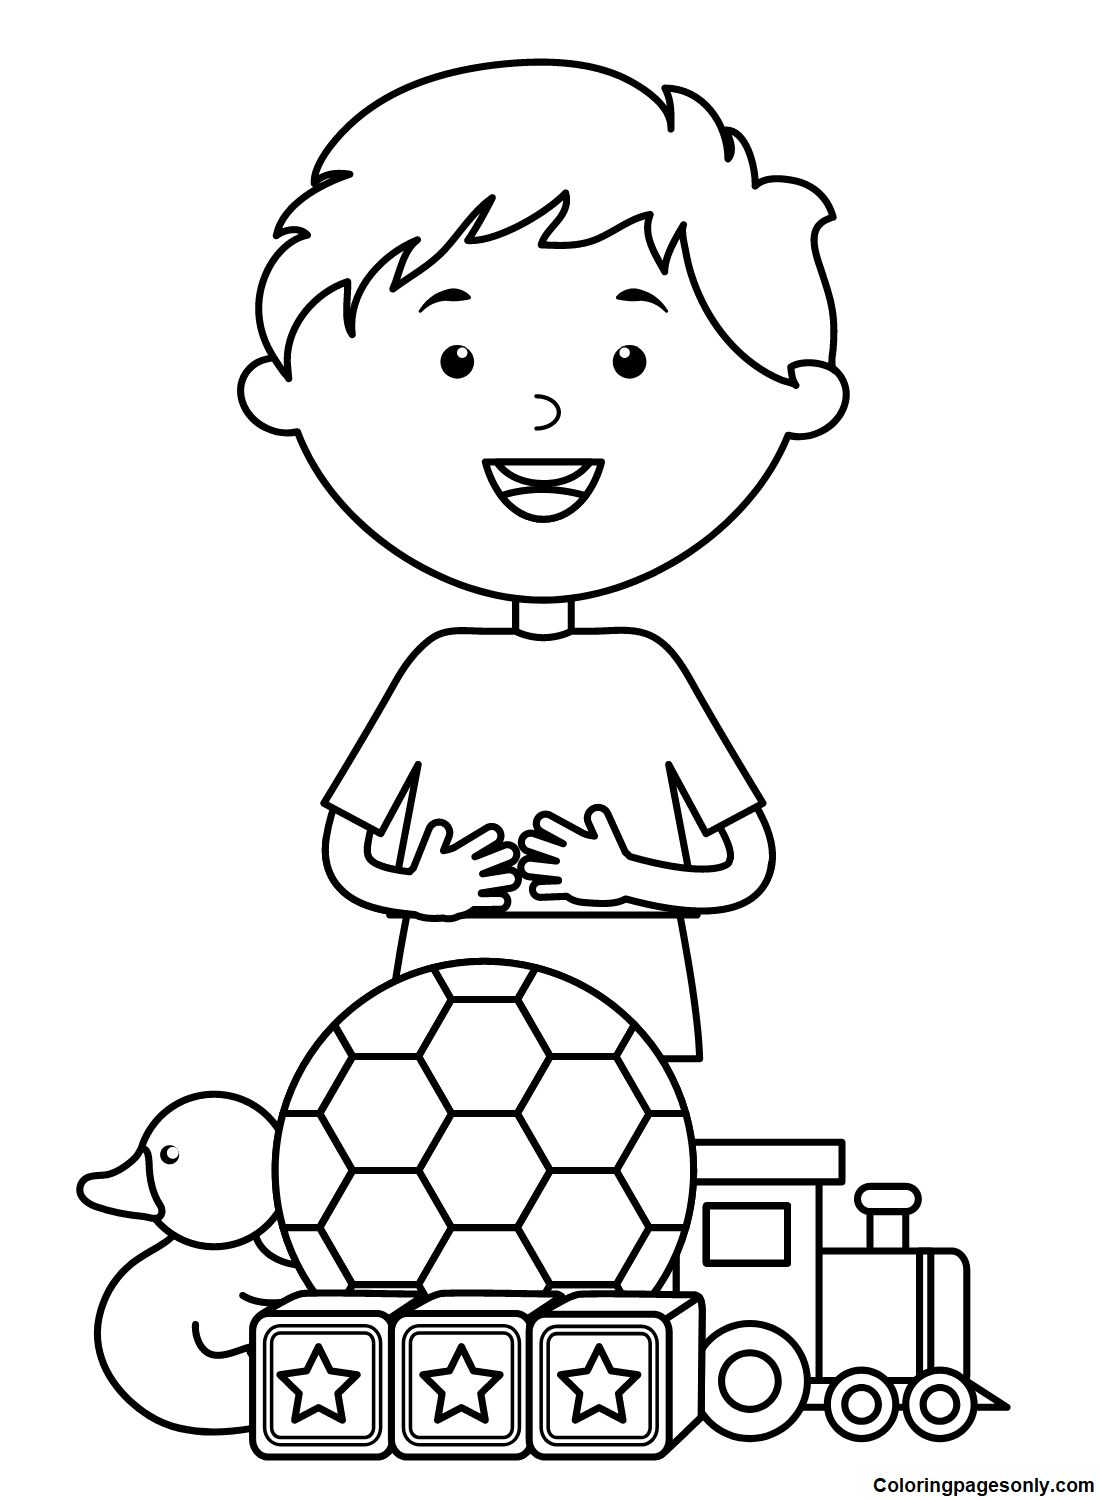 Cute Little Boy with Soccer Ball and Toys Coloring Pages